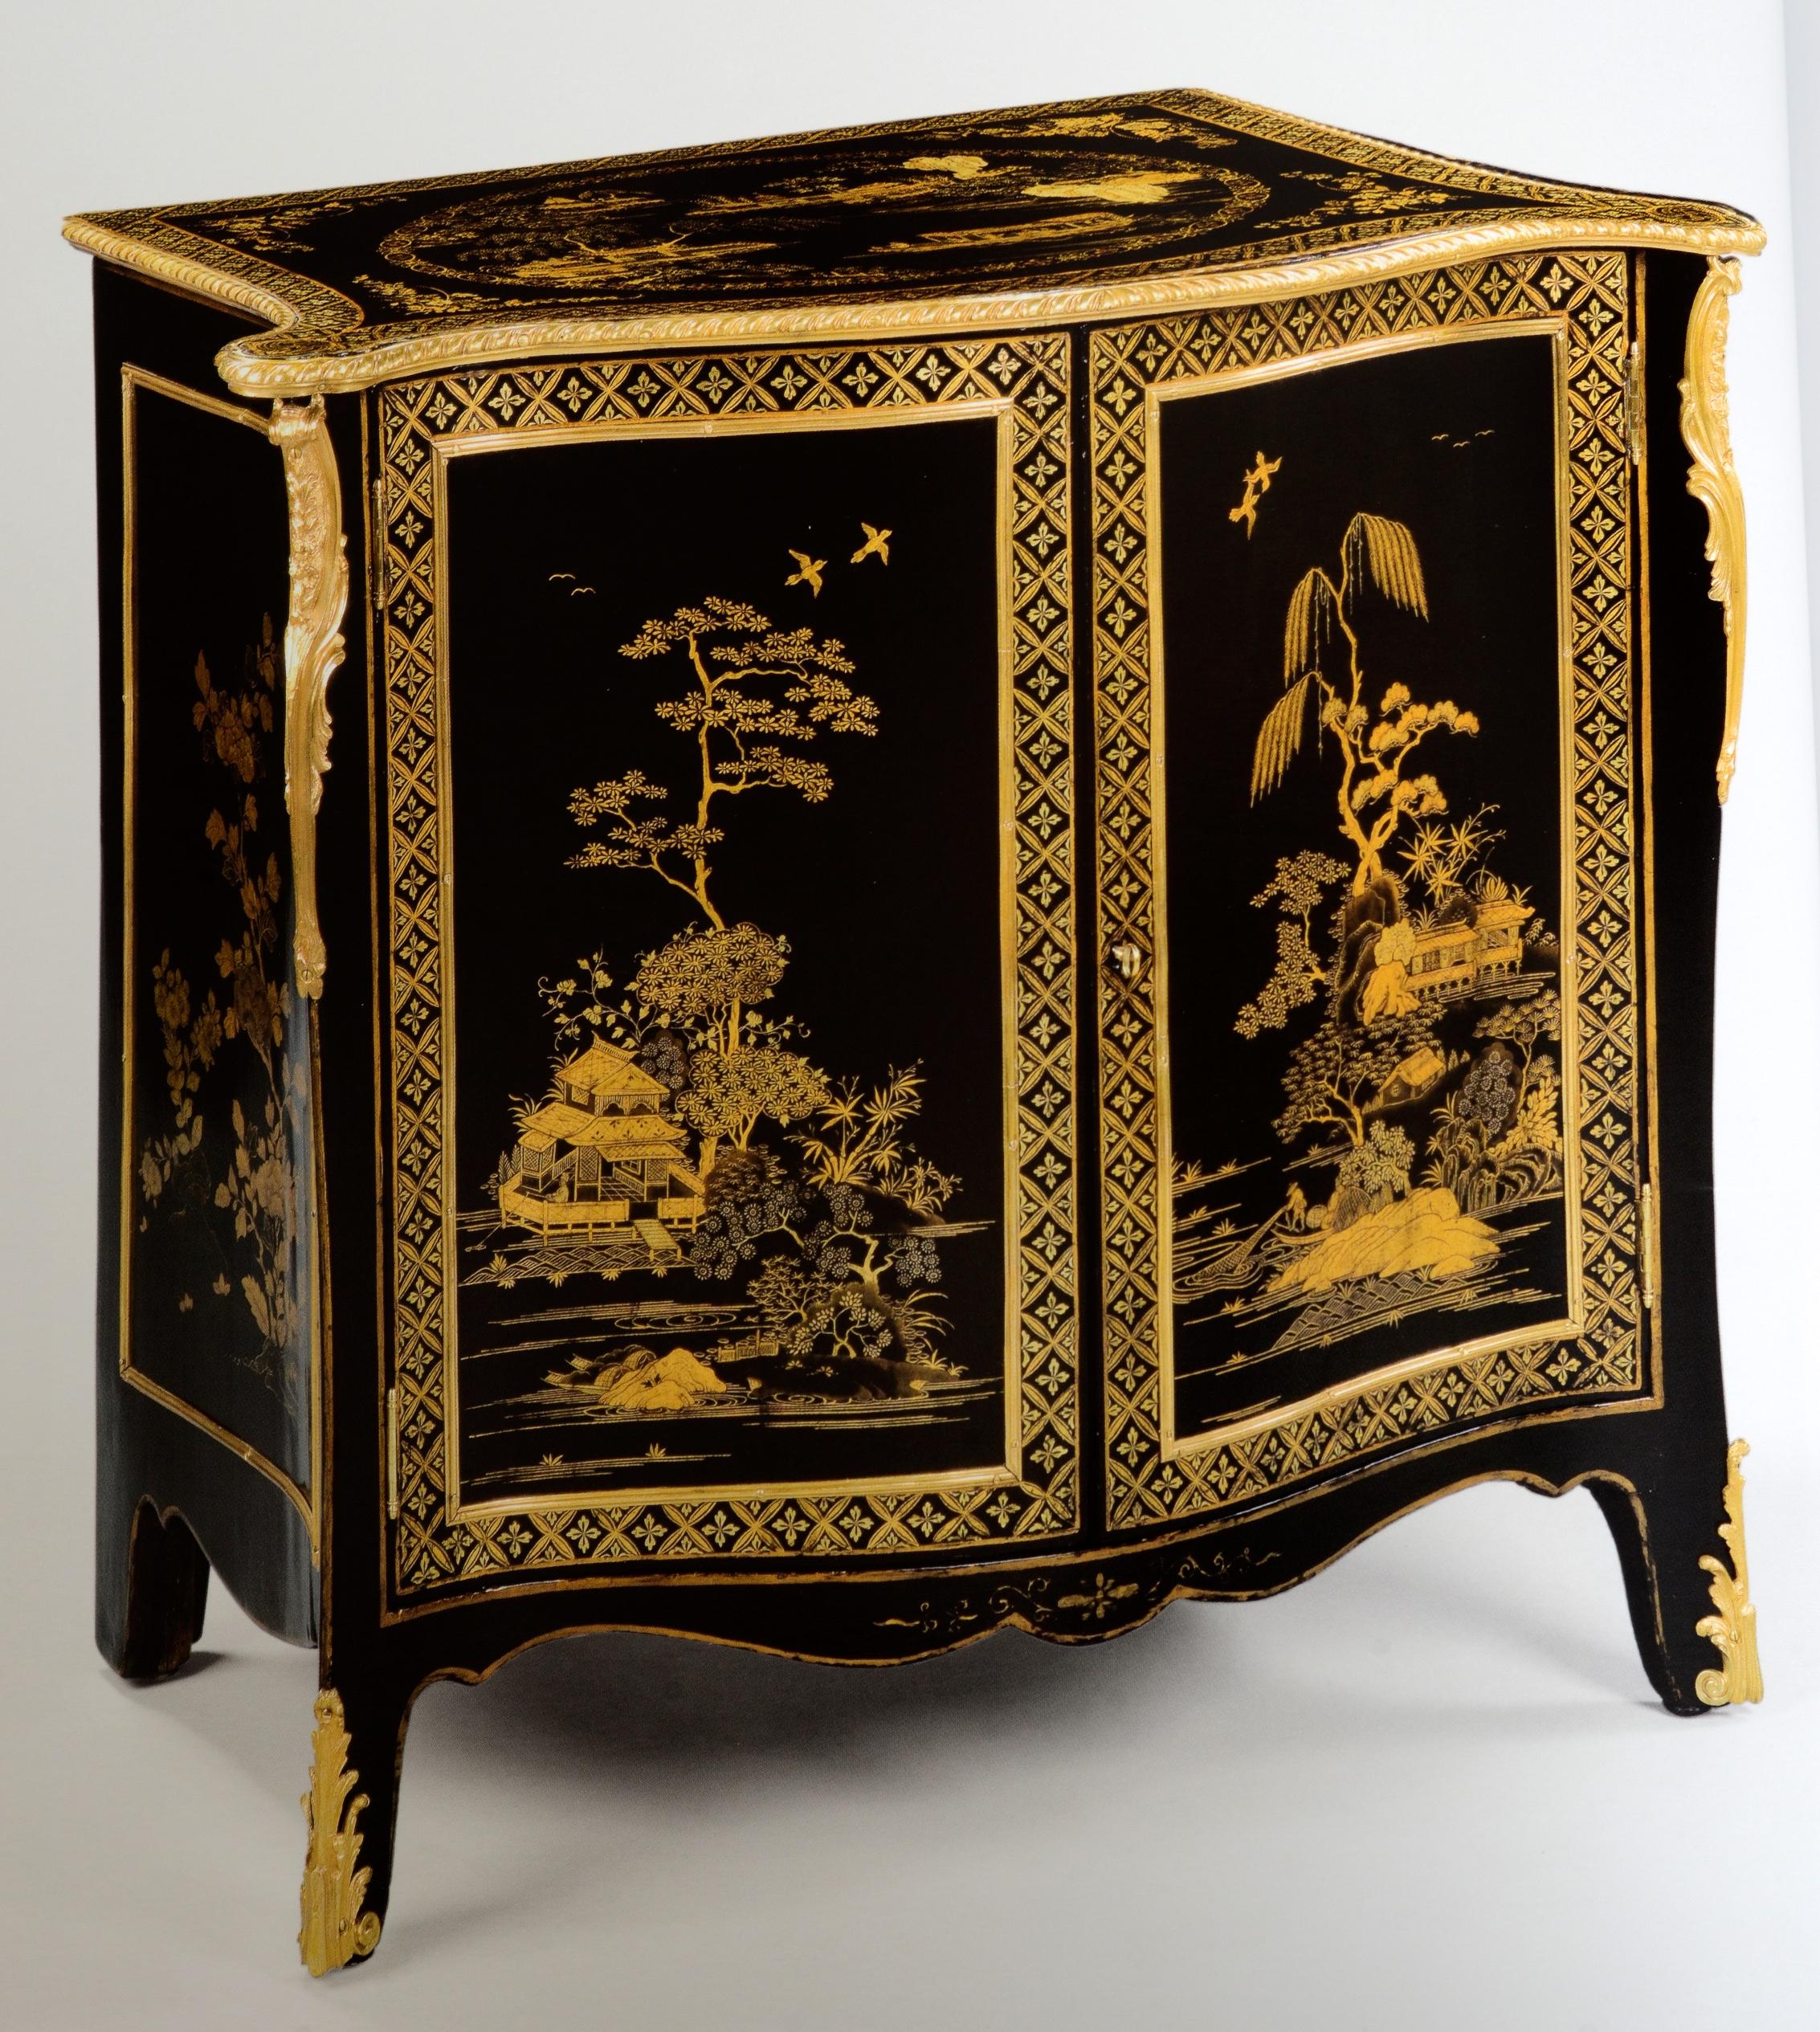 Exceptional Furniture & Works of Art by Mallett & Son Antiques, First Edition For Sale 9